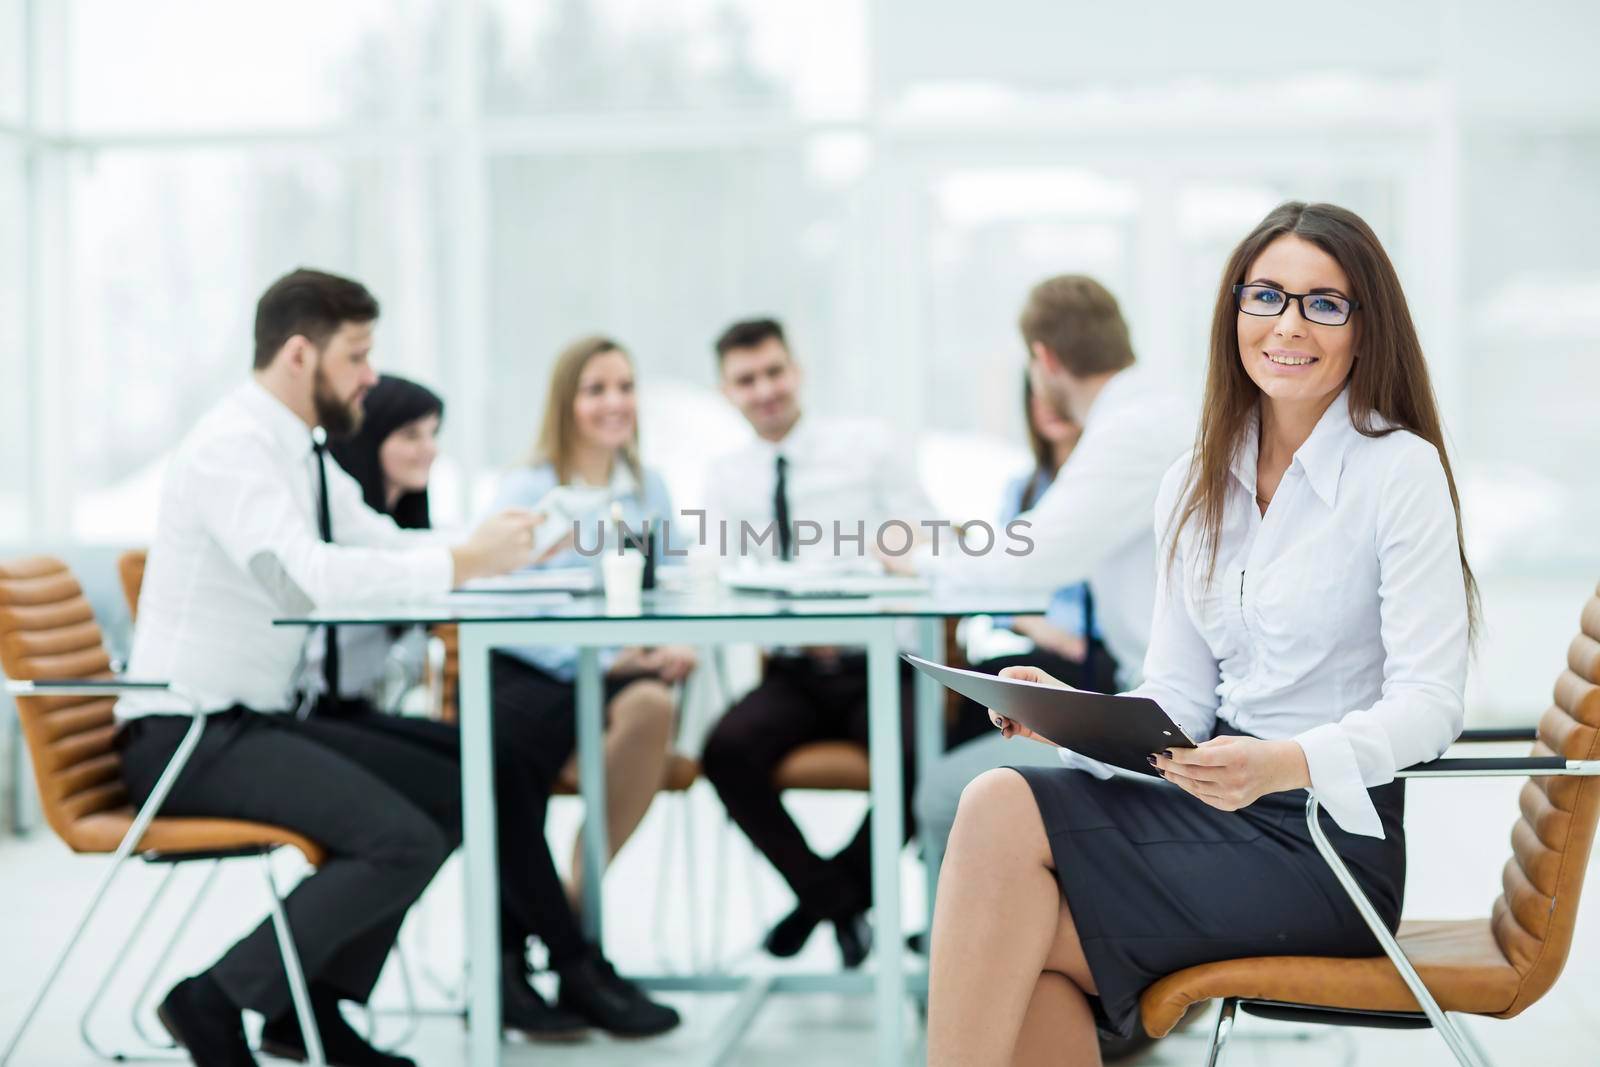 leading lawyer of the company on background, business meeting business partners by SmartPhotoLab